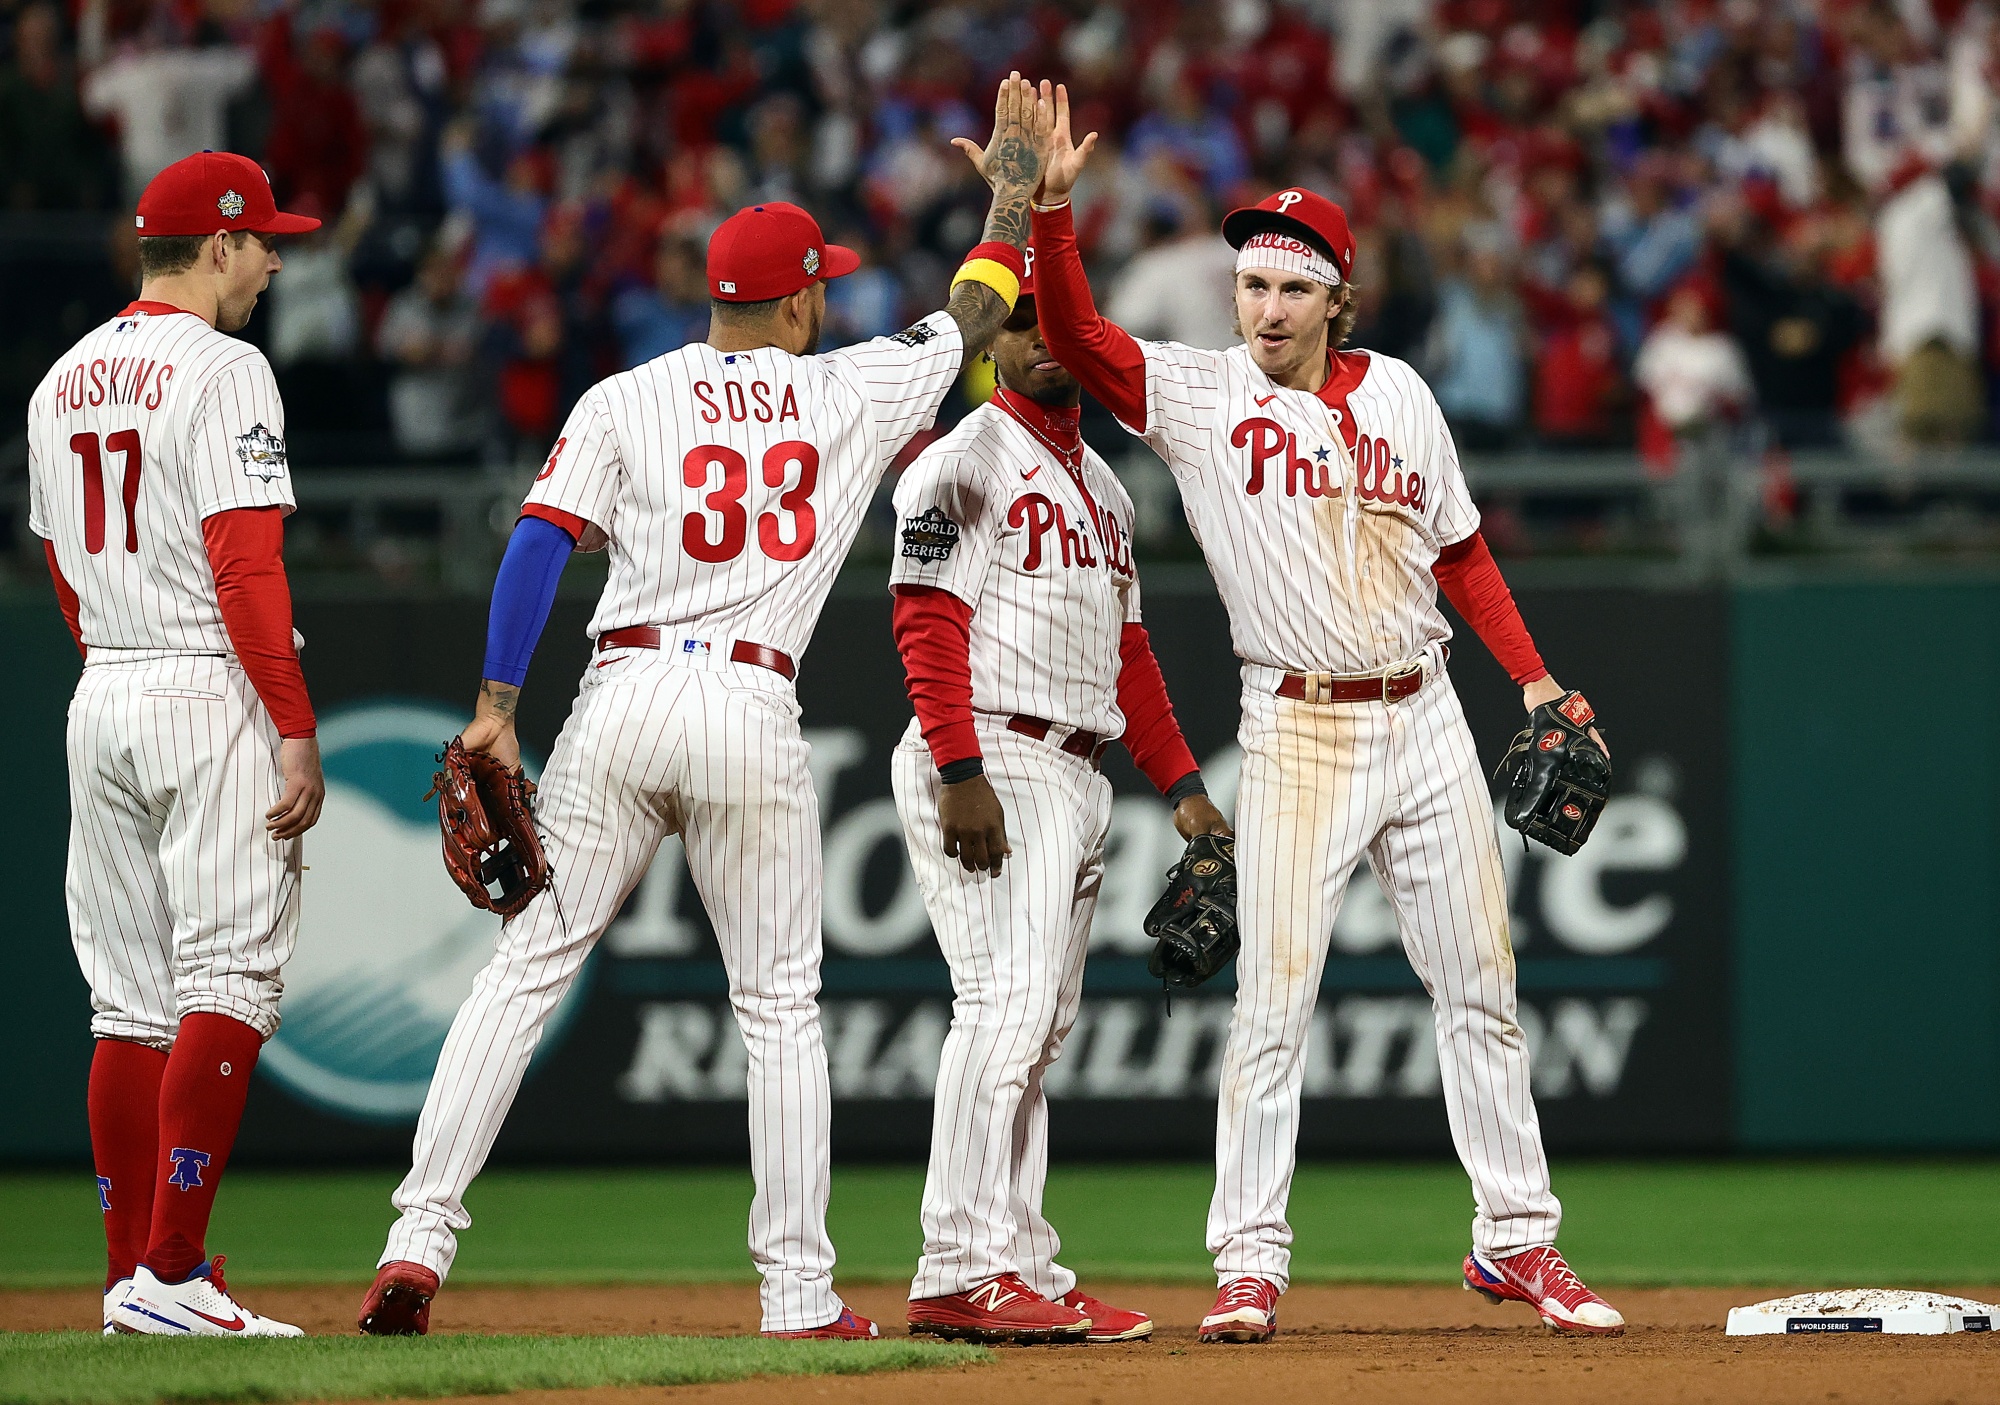 Phillies and Astros playing in rematch of remarkable 1980 NLCS